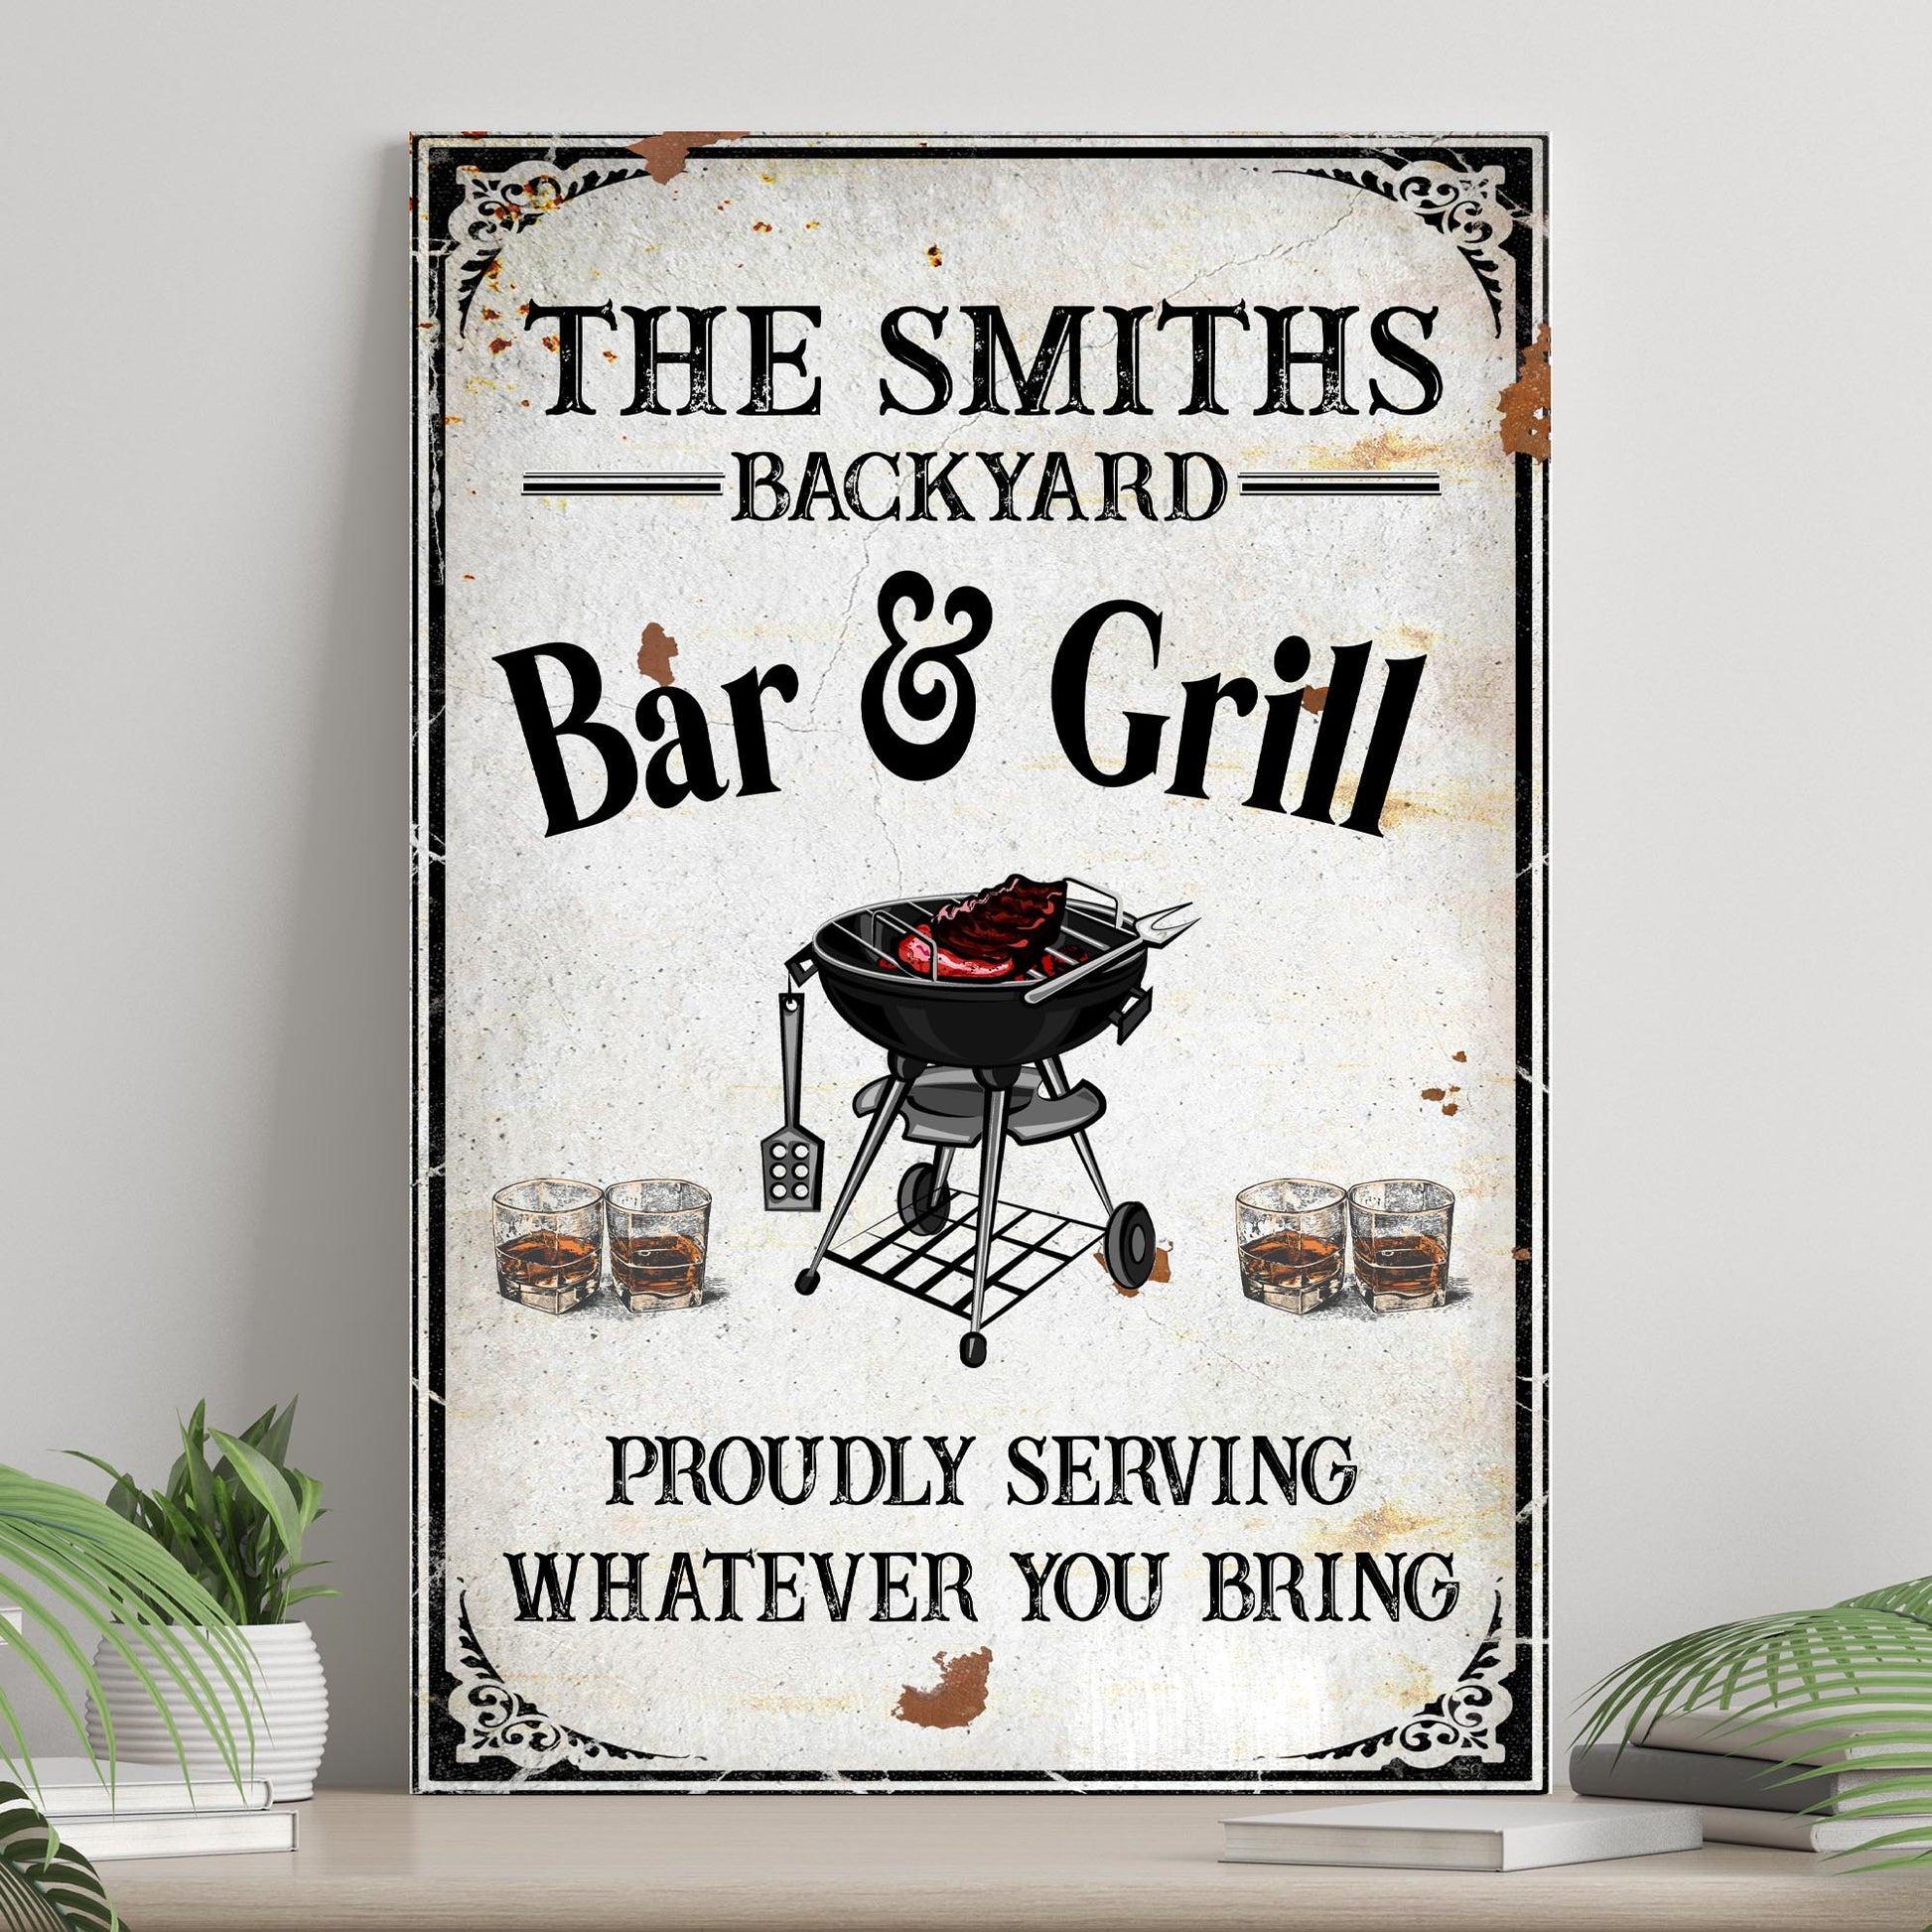 Family Backyard Bar And Grill Sign - Image by Tailored Canvases